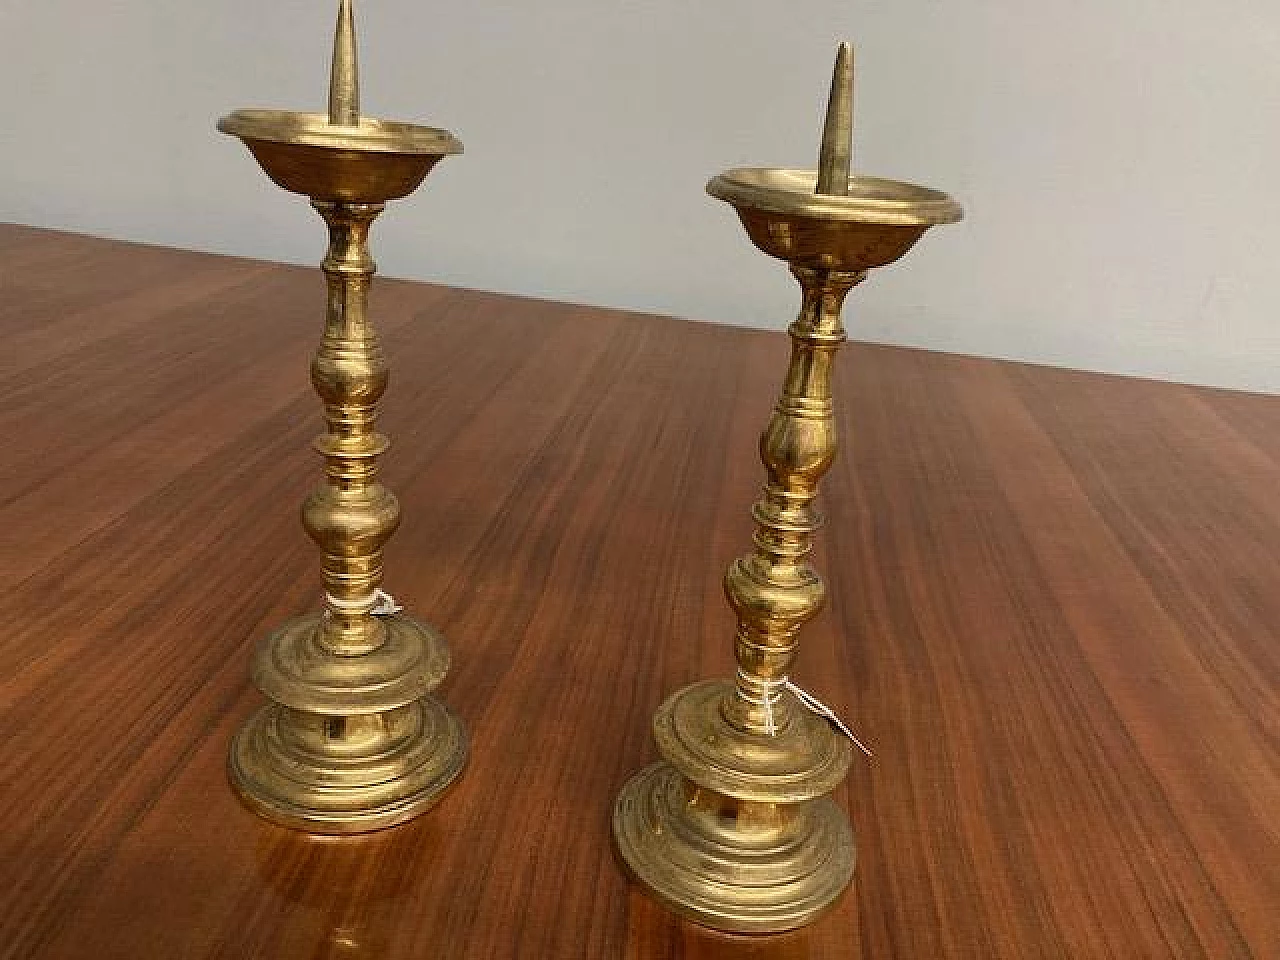 Pair of Empire bronze candlesticks, early 19th century 6